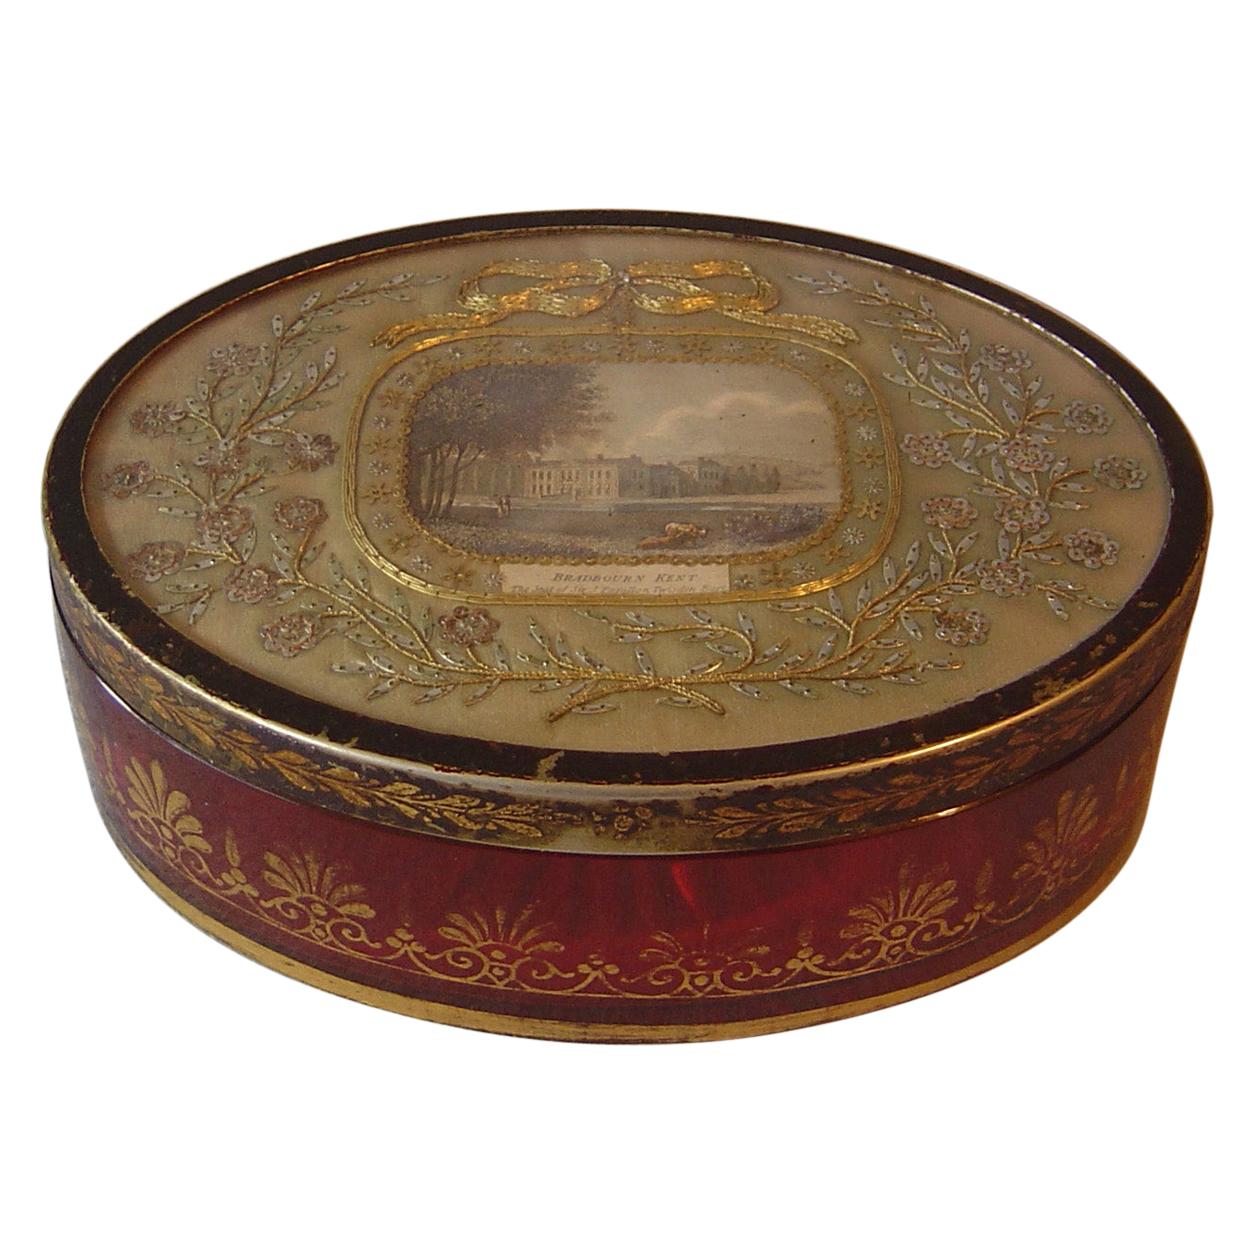 English Regency Cranberry Glass and Toleware Box with Inset Embroidery